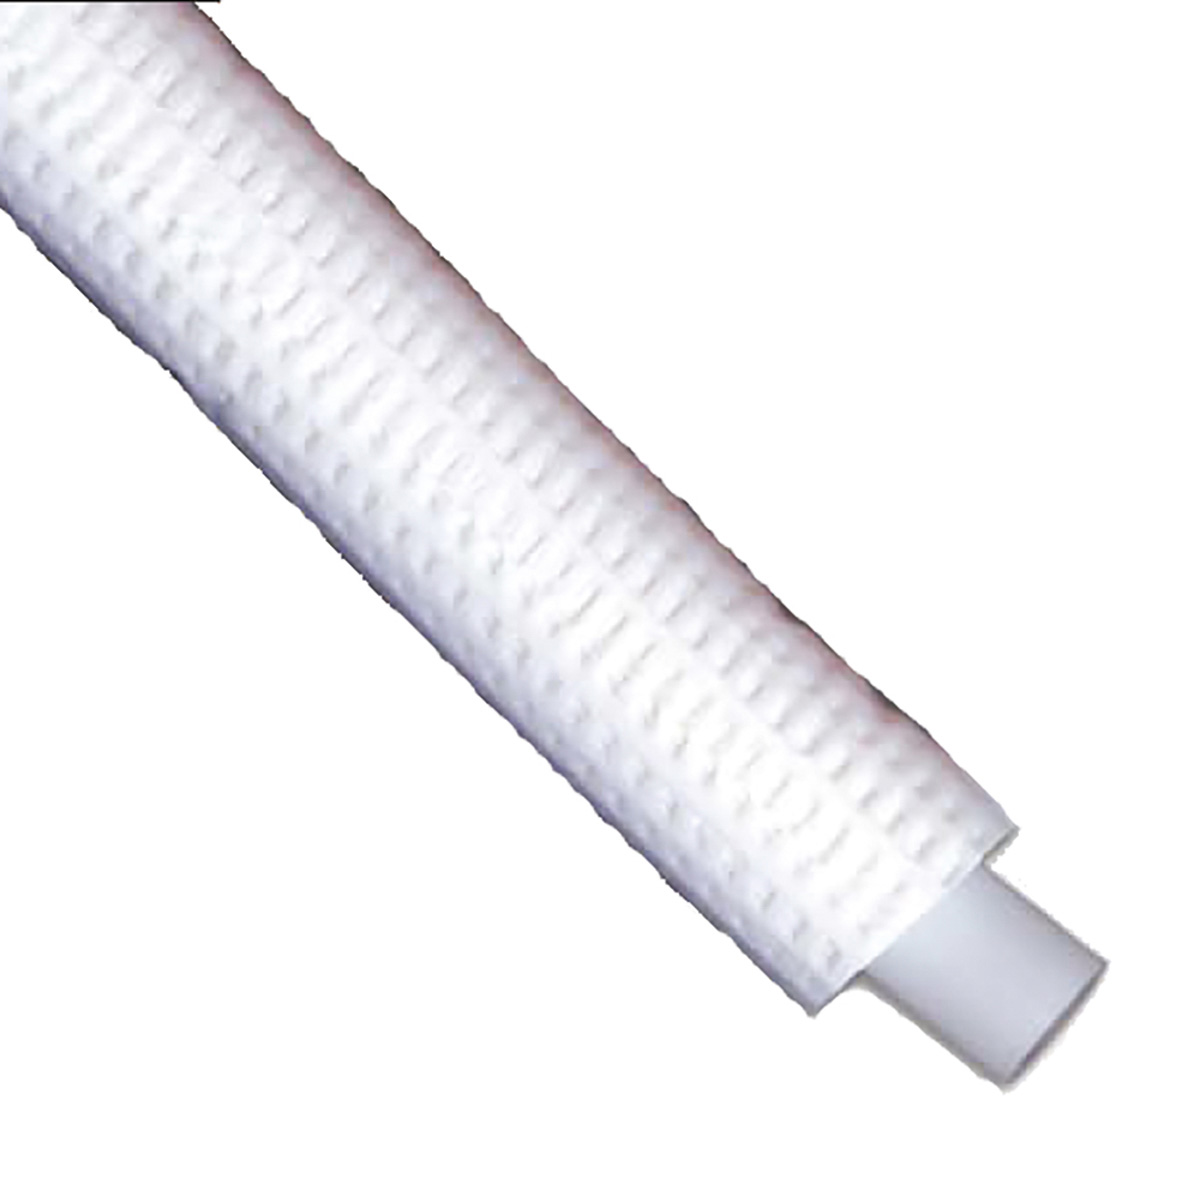 SESTA Pipe PEX-AL Roll with Insulation 20(13mm thickness)